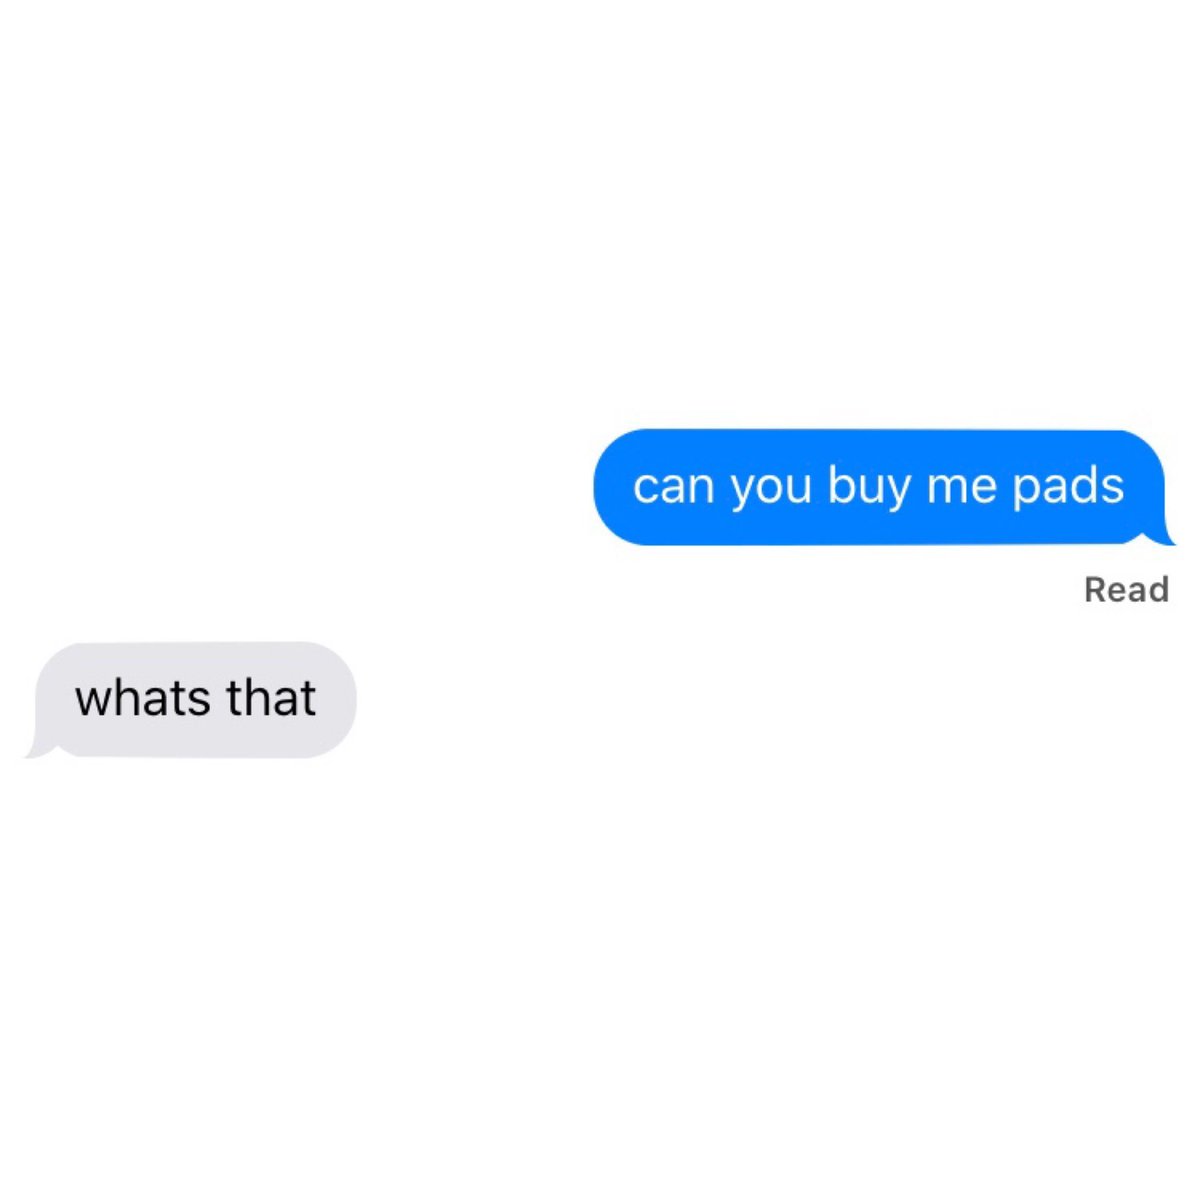 DAY6 responding to “Can you buy me pads?” — a thread